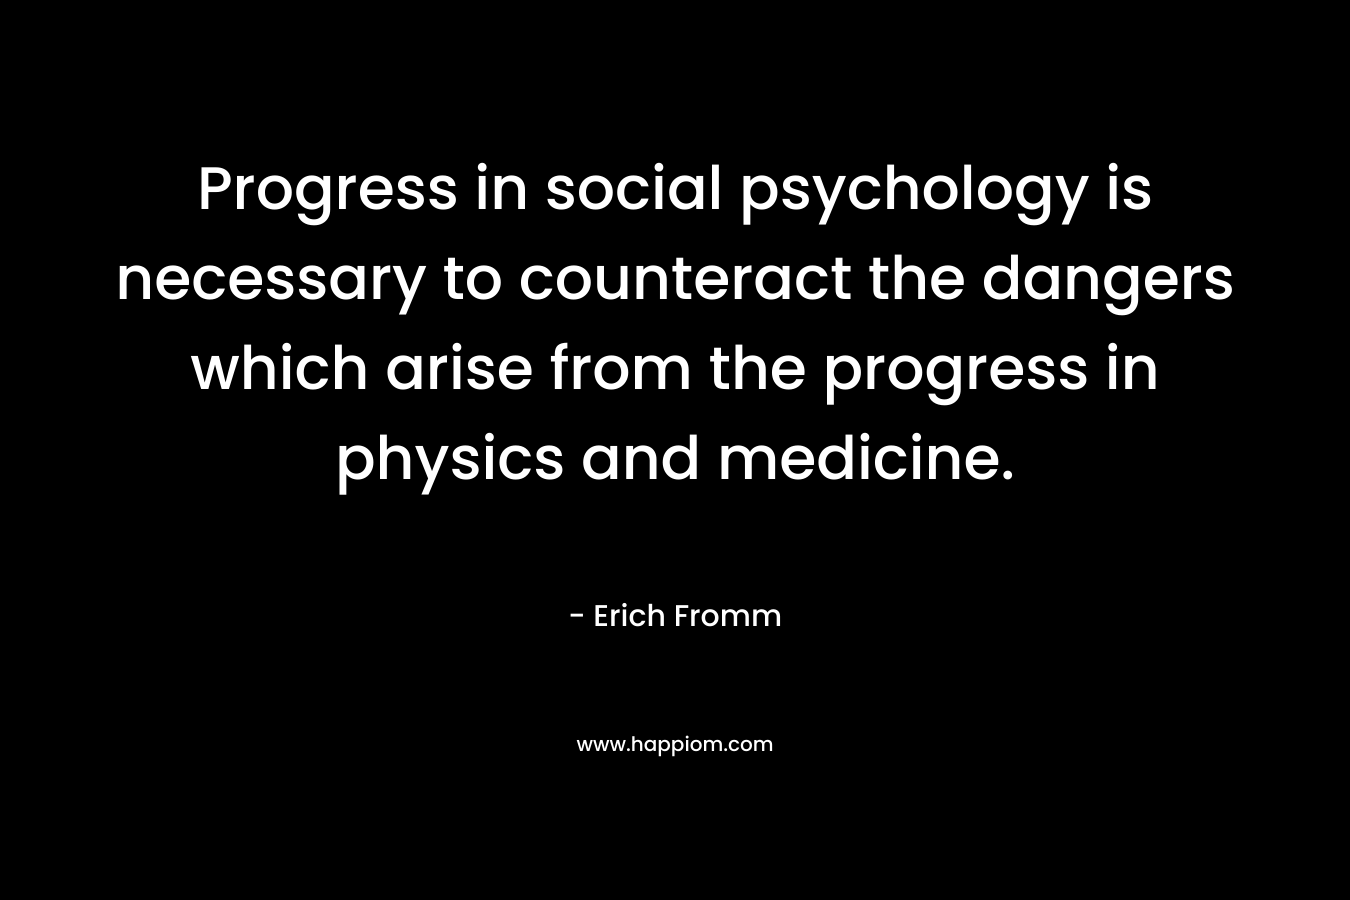 Progress in social psychology is necessary to counteract the dangers which arise from the progress in physics and medicine. – Erich Fromm